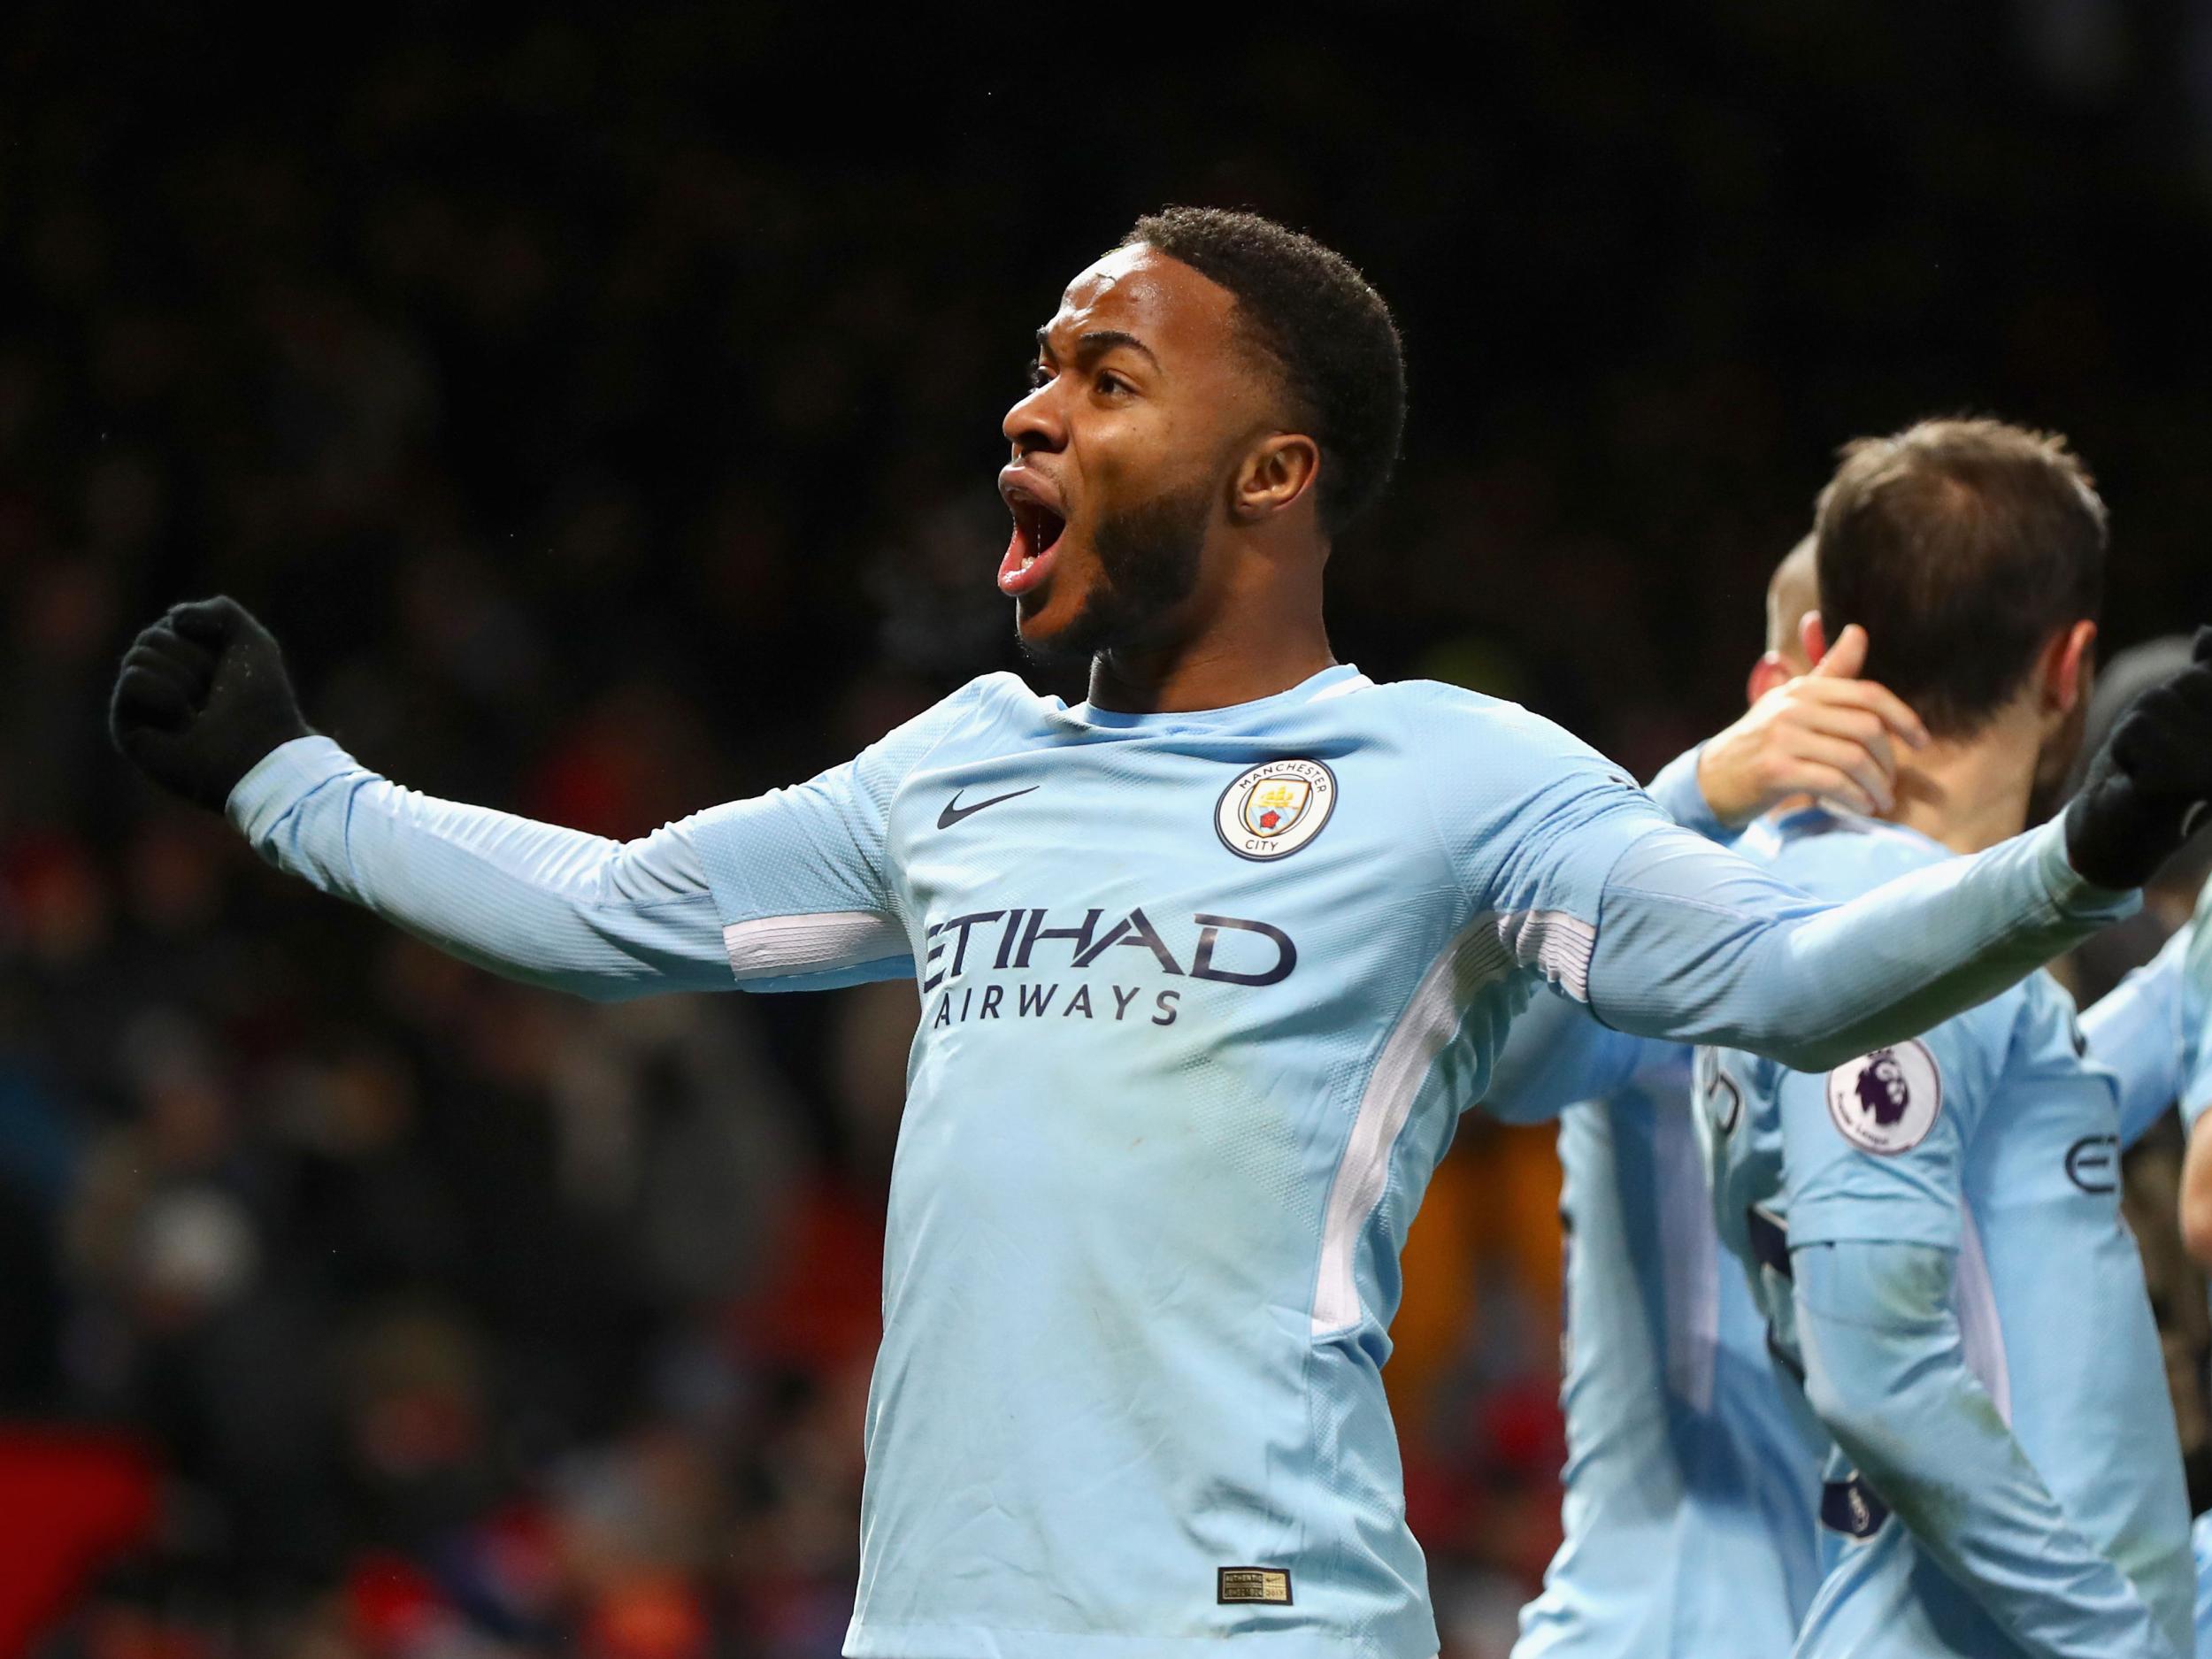 Raheem Sterling was attacked ahead of Manchester City's win over Tottenham on Saturday